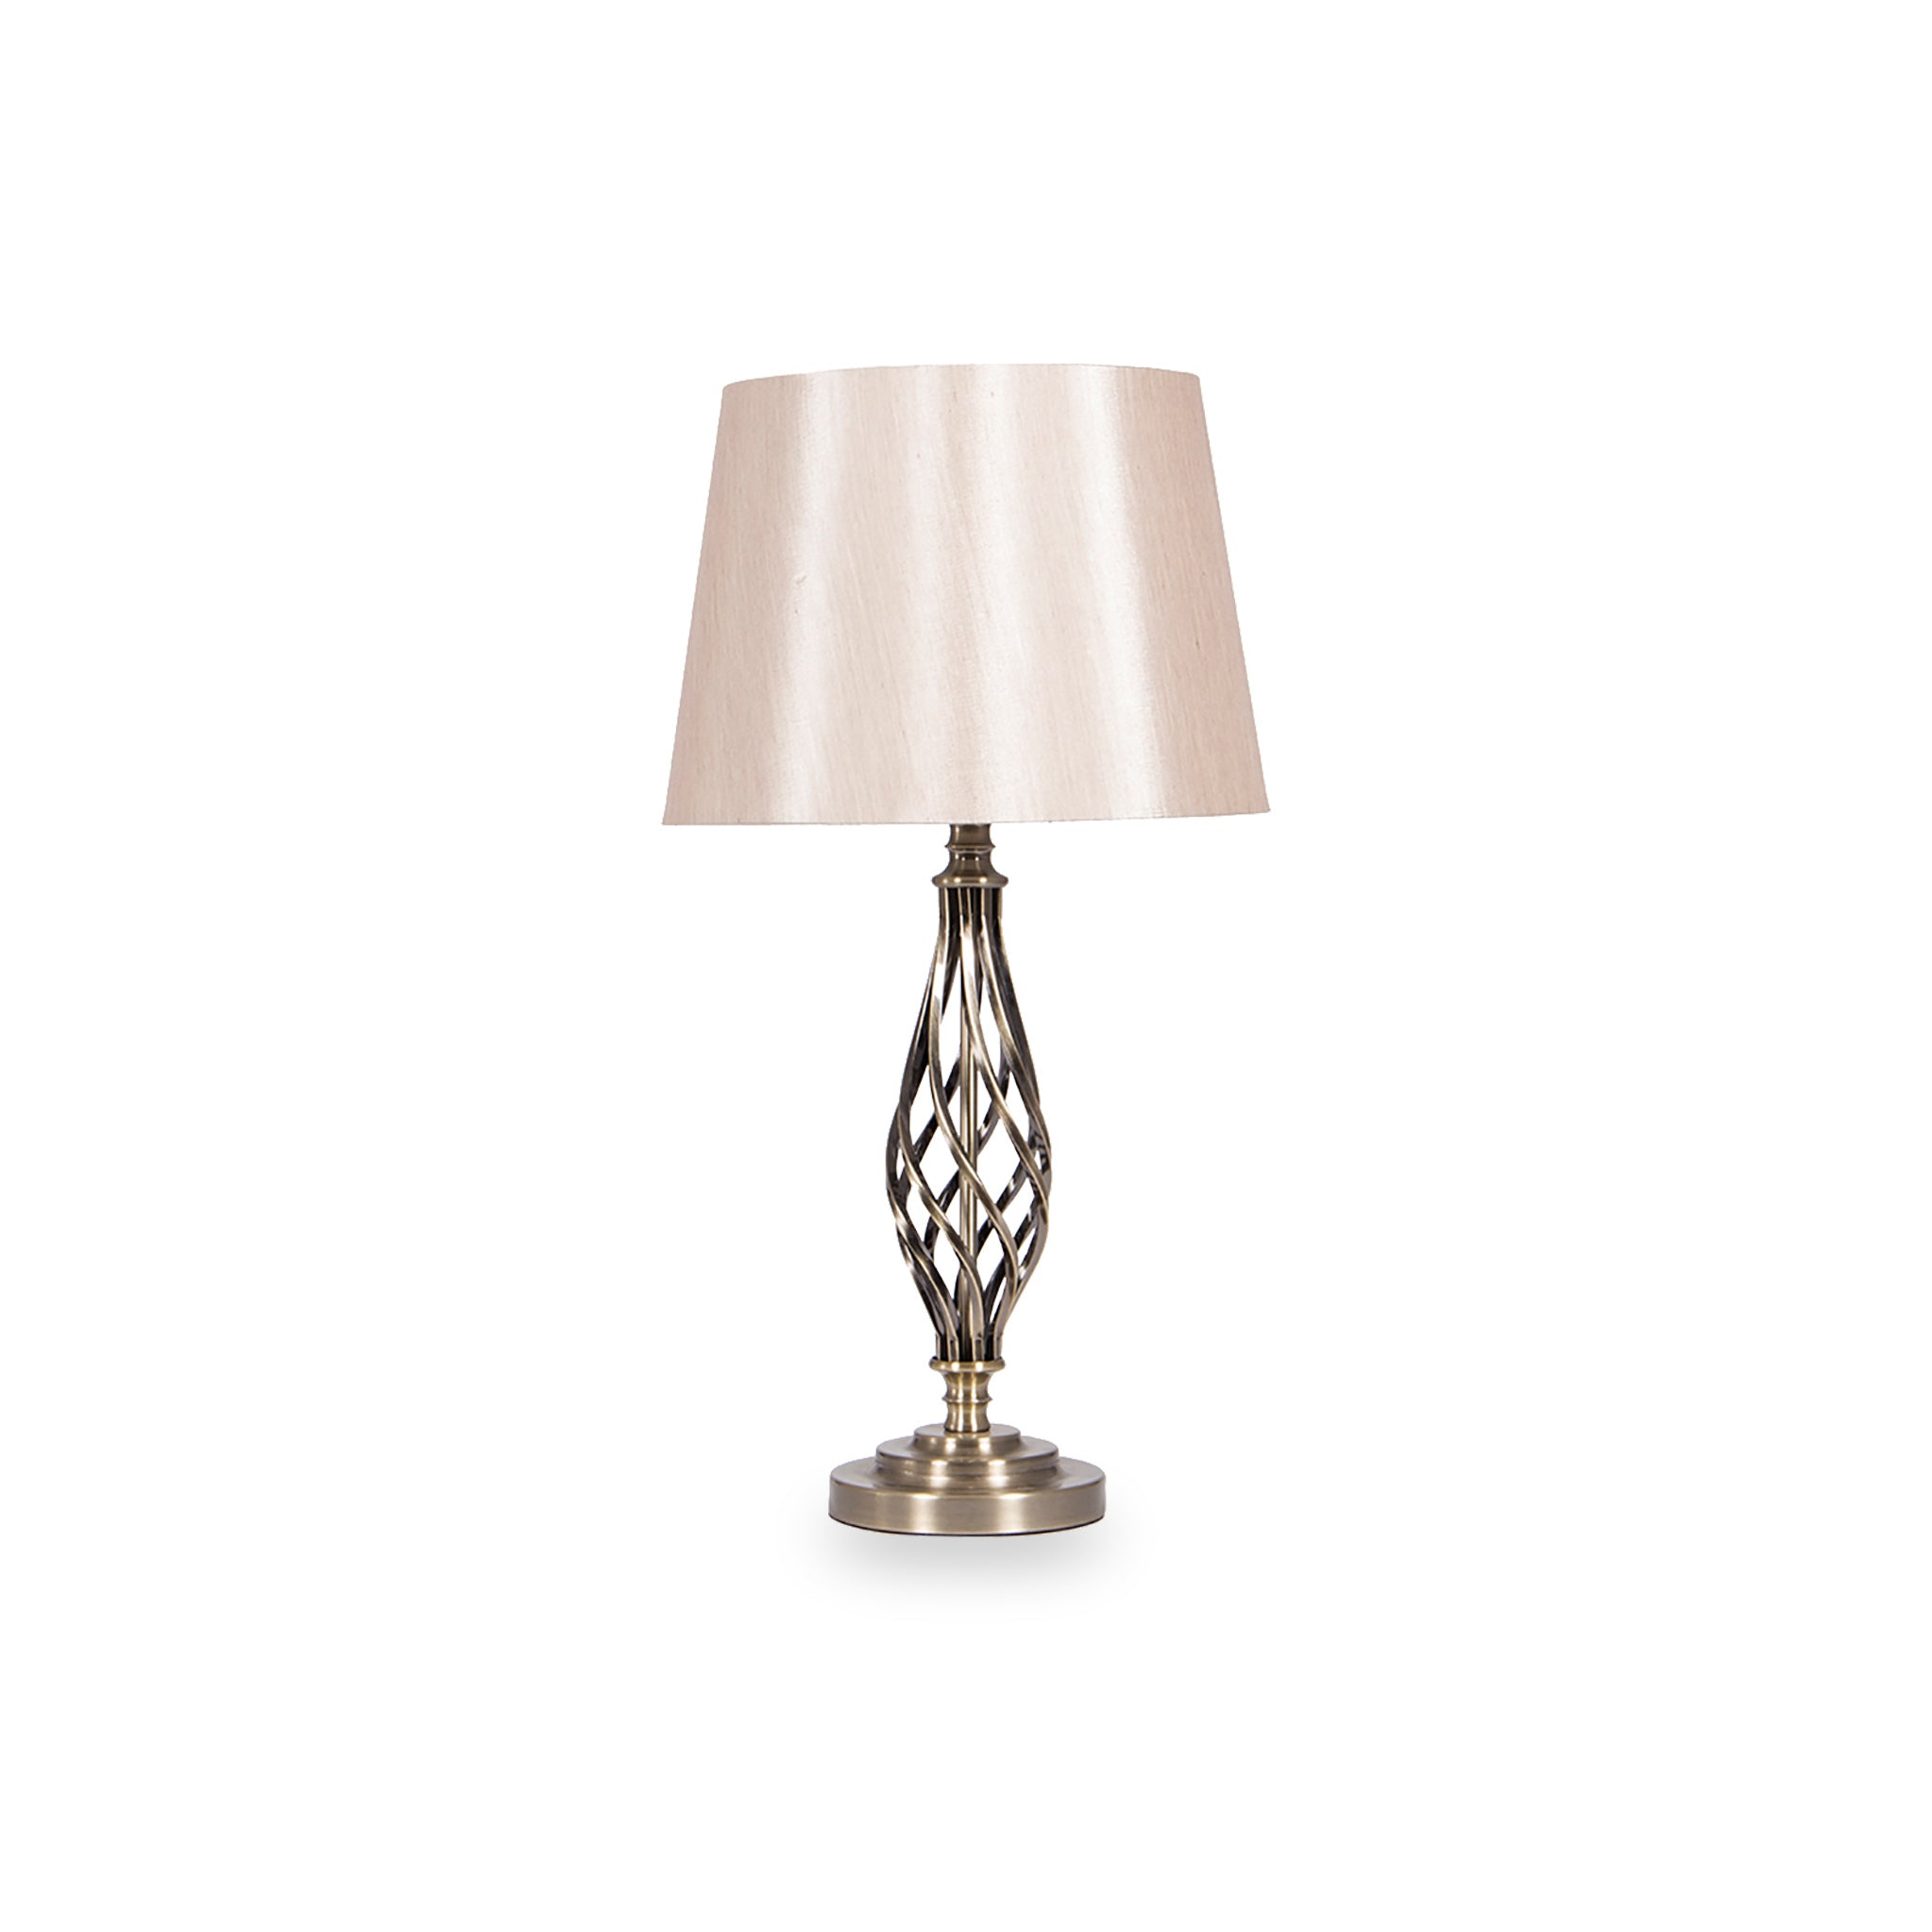 Jenna Antique Brass Metal Twist Detail Table Lamp For Living Room